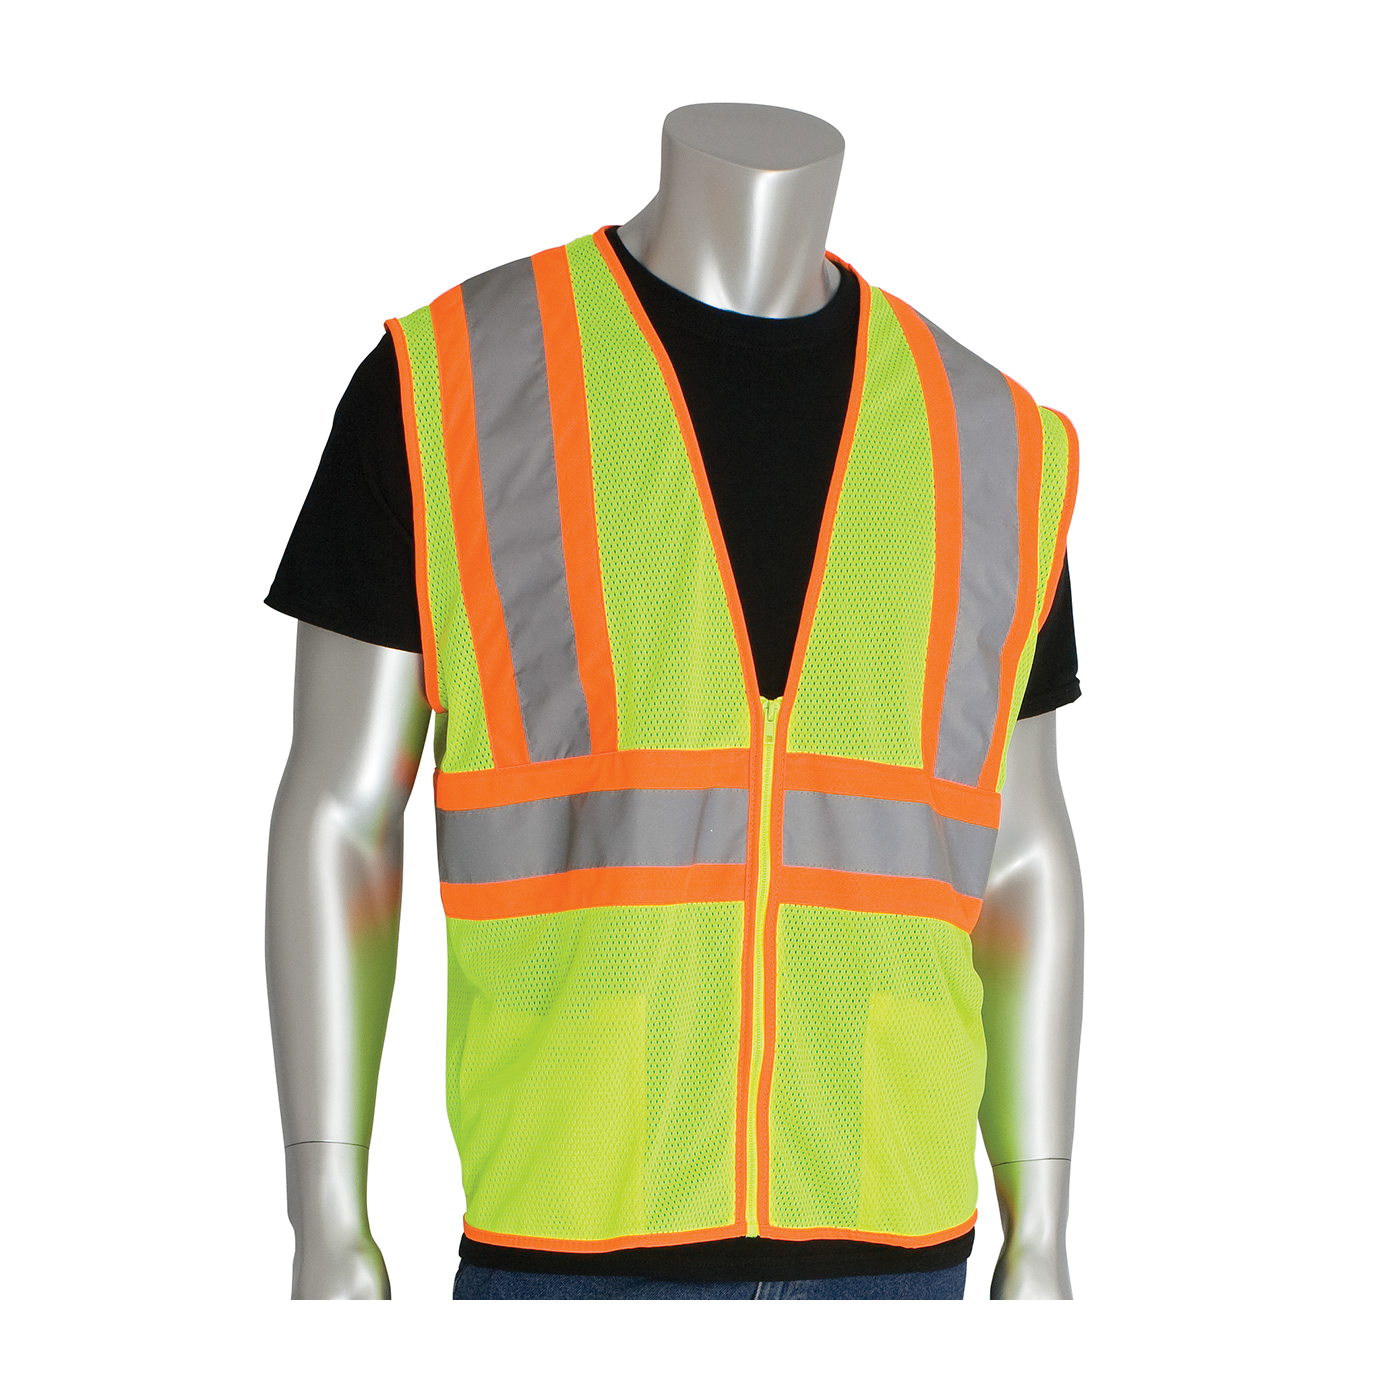 PIP® 302-MVLY-4X 2-Tone Safety Vest, 4XL, Hi-Viz Lime Yellow, Polyester Mesh, Zipper Closure, 2 Pockets, ANSI Class: Class 2, Specifications Met: ANSI 107 Type R